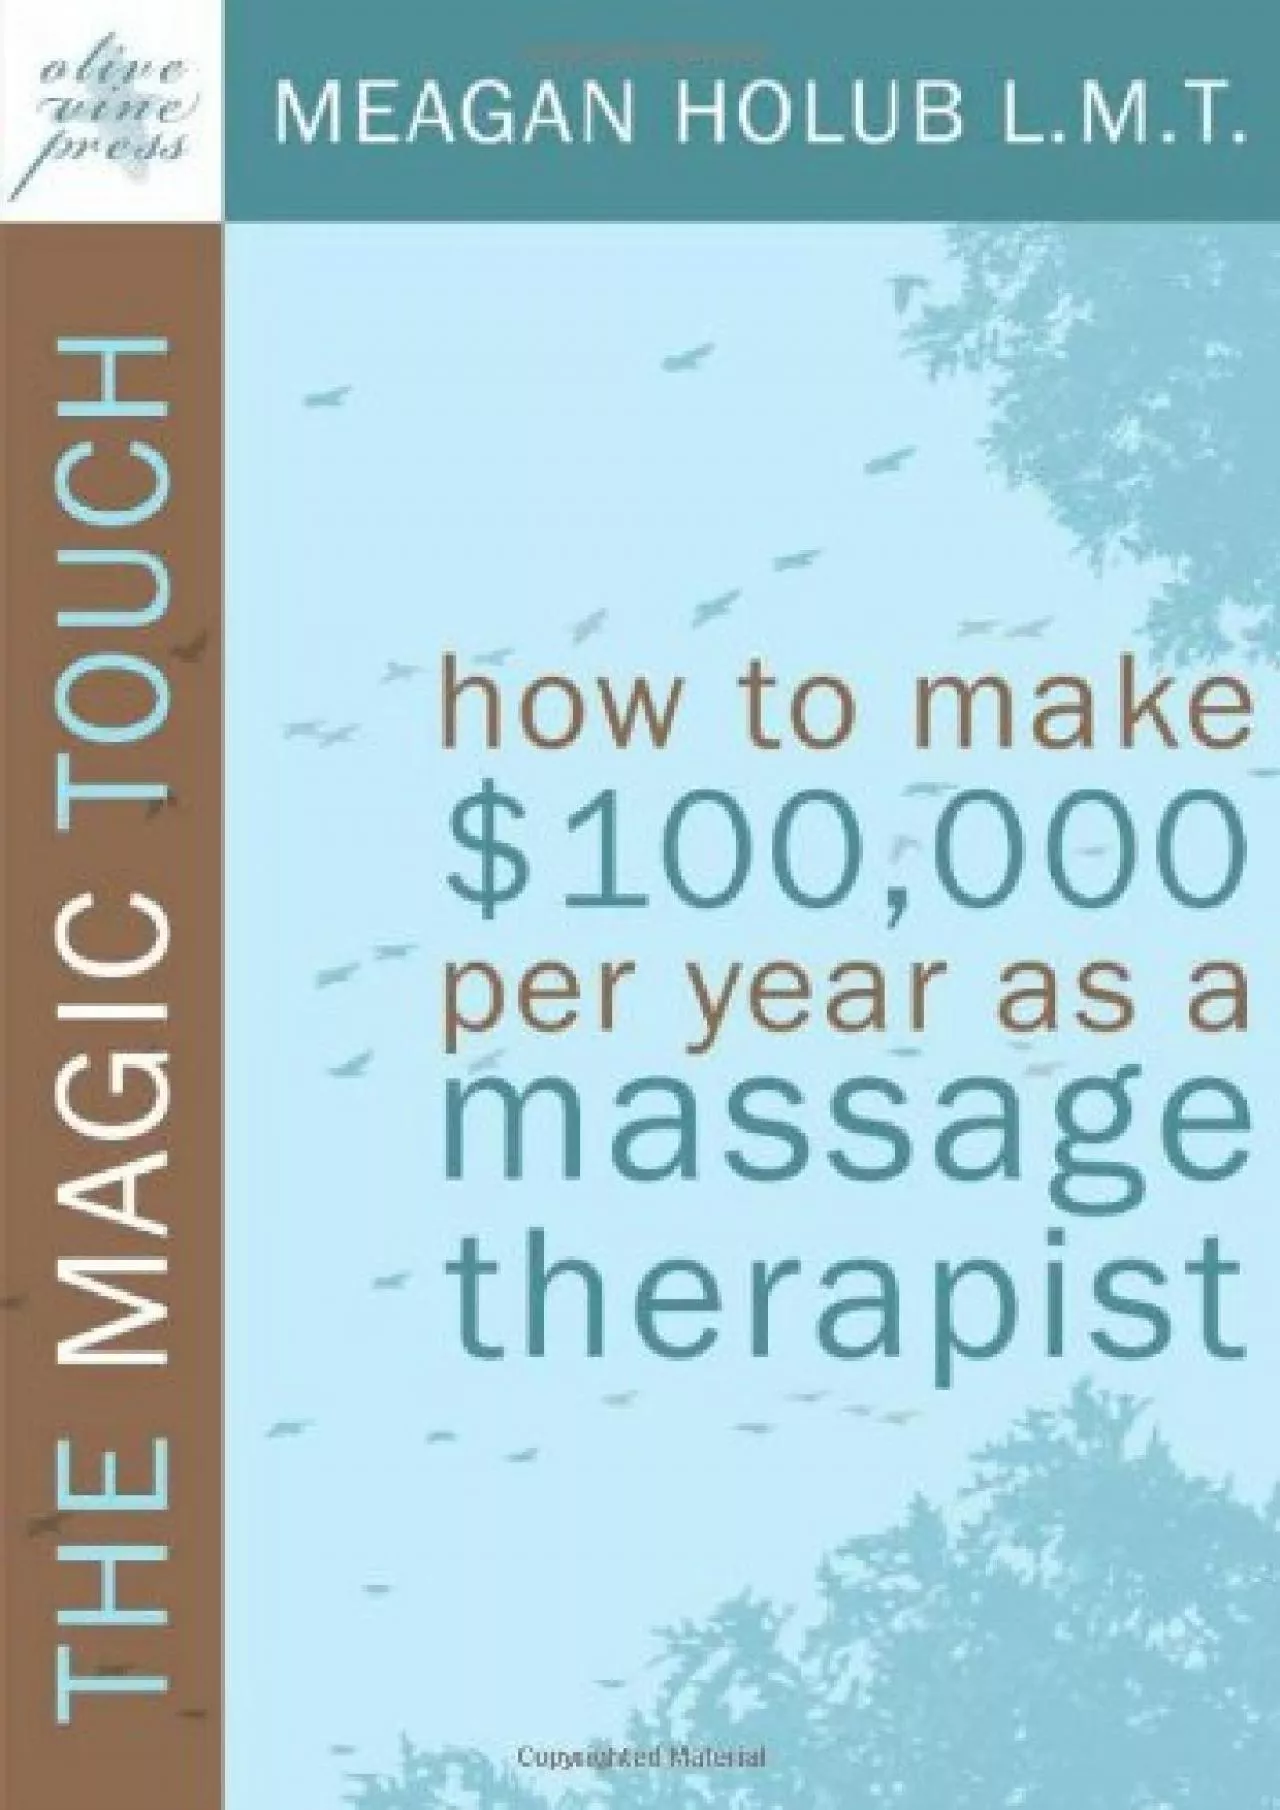 (DOWNLOAD)-The Magic Touch: How to make $100,000 per year as a Massage Therapist simple